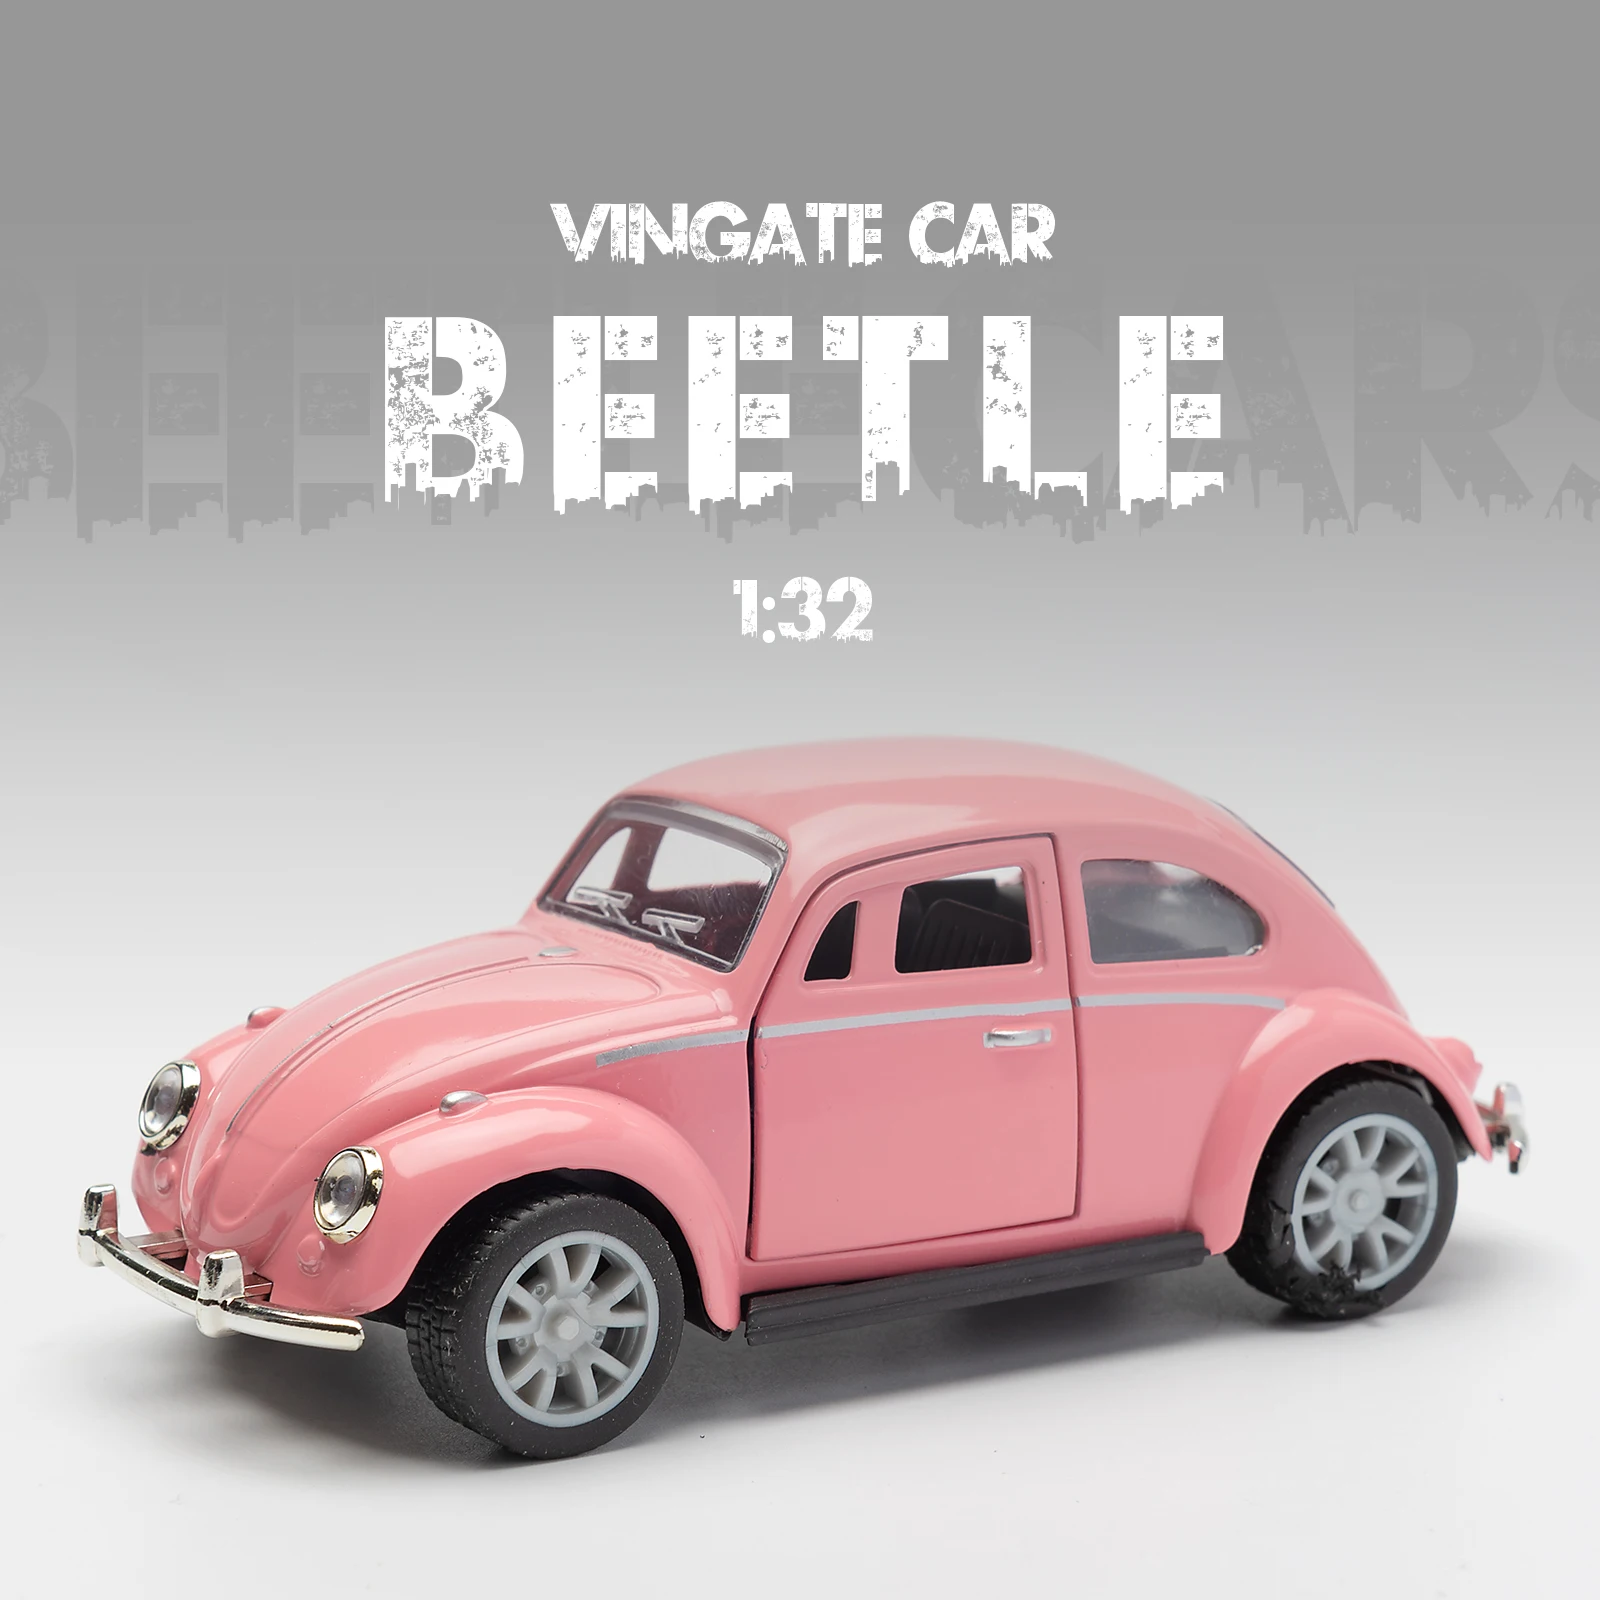 1:32 Alloy Diecast BEETLE Vintage Cabriolet Car Model Classic Pull Back Car Miniature Vehicle Replica For Collection Gift Kids